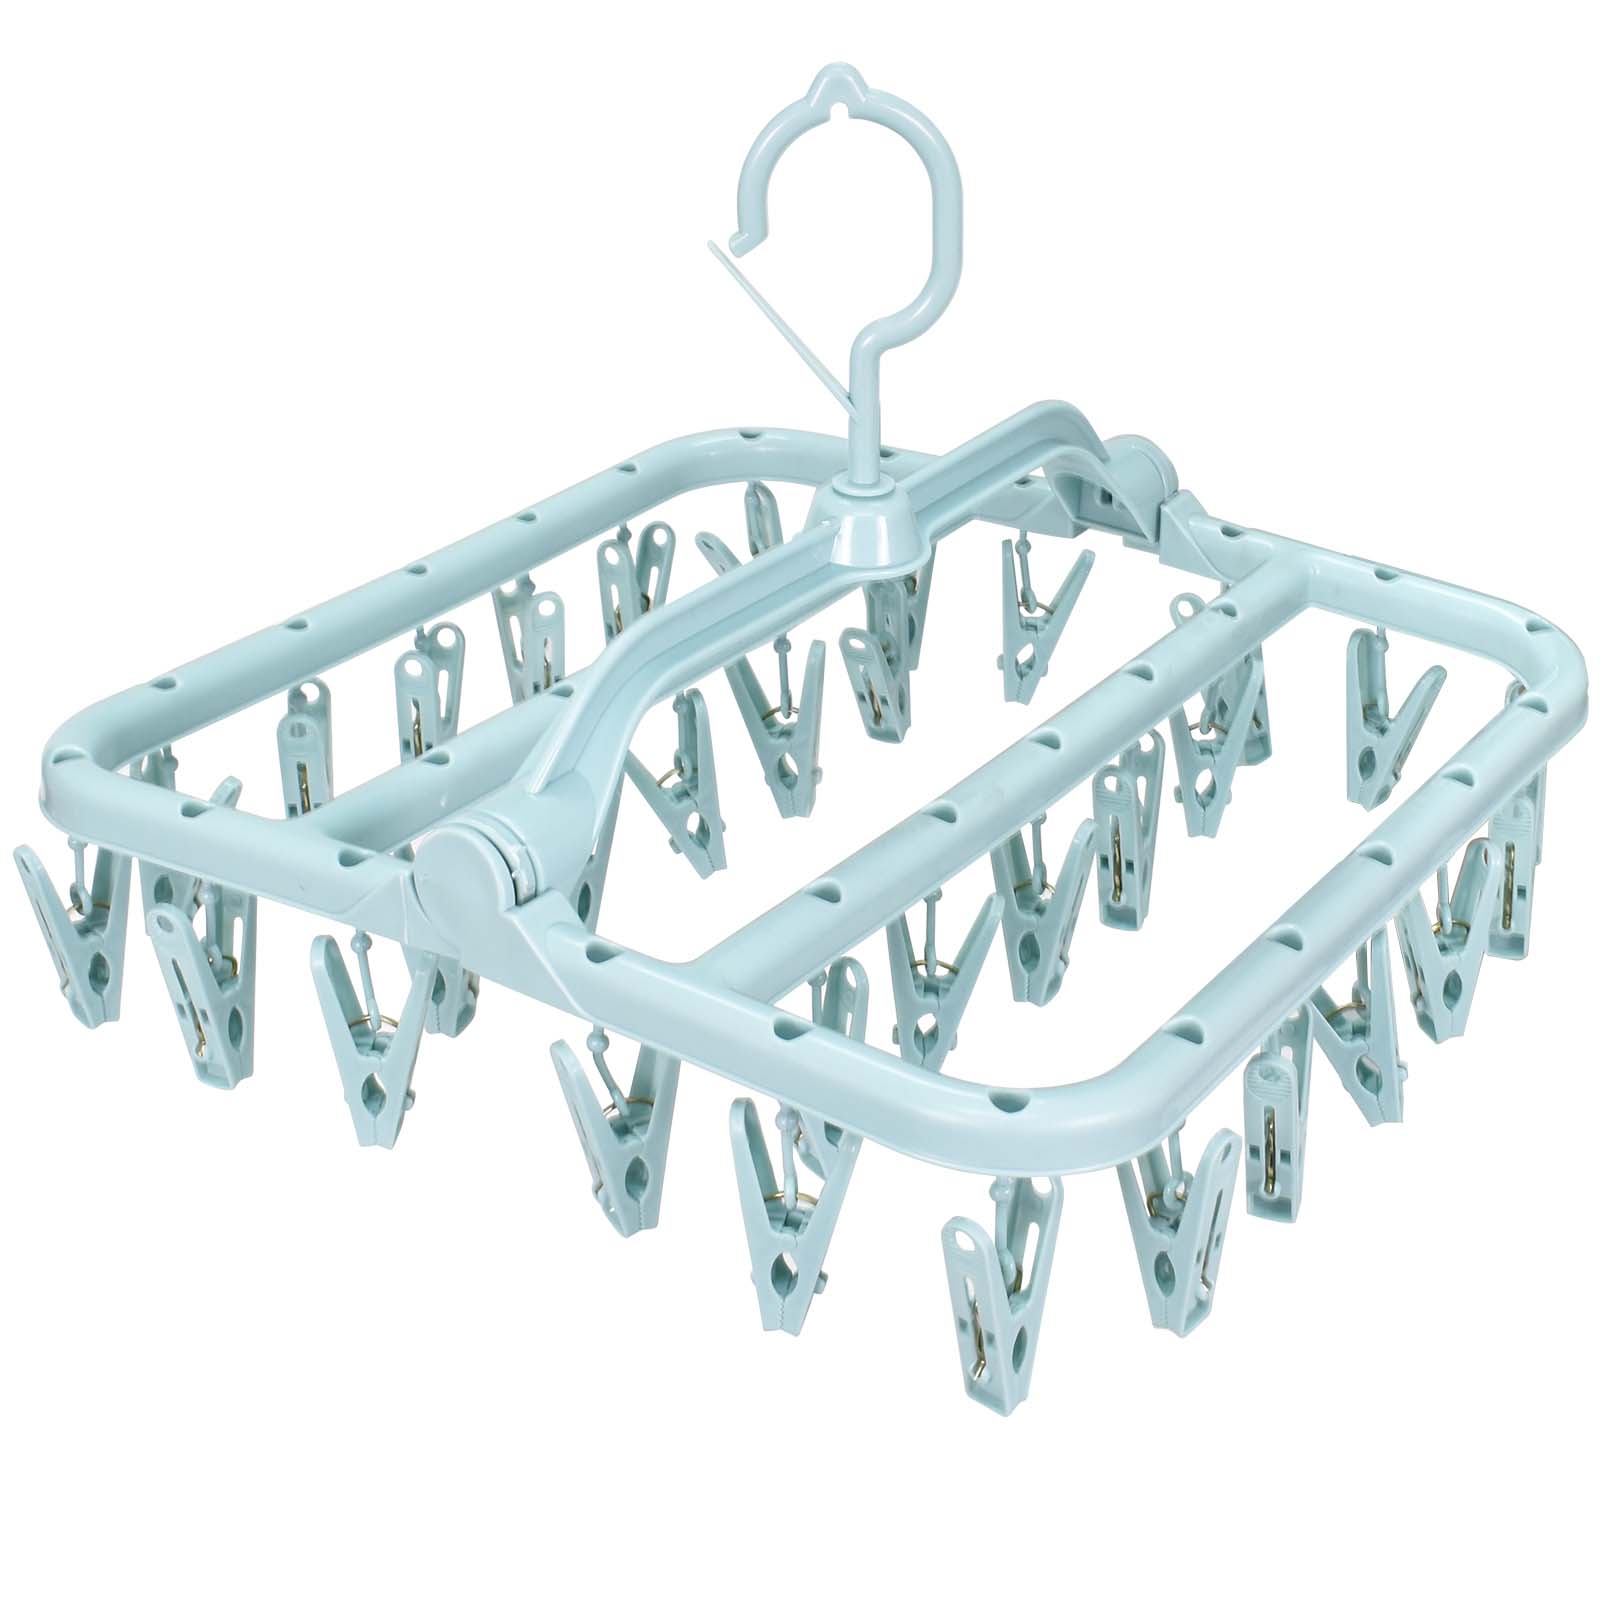 5pcs Children's Butterfly Shaped Plastic Hangers, Multifunctional,  Stretchable And Retractable Clothes Drying Rack, For Infant And Toddlers